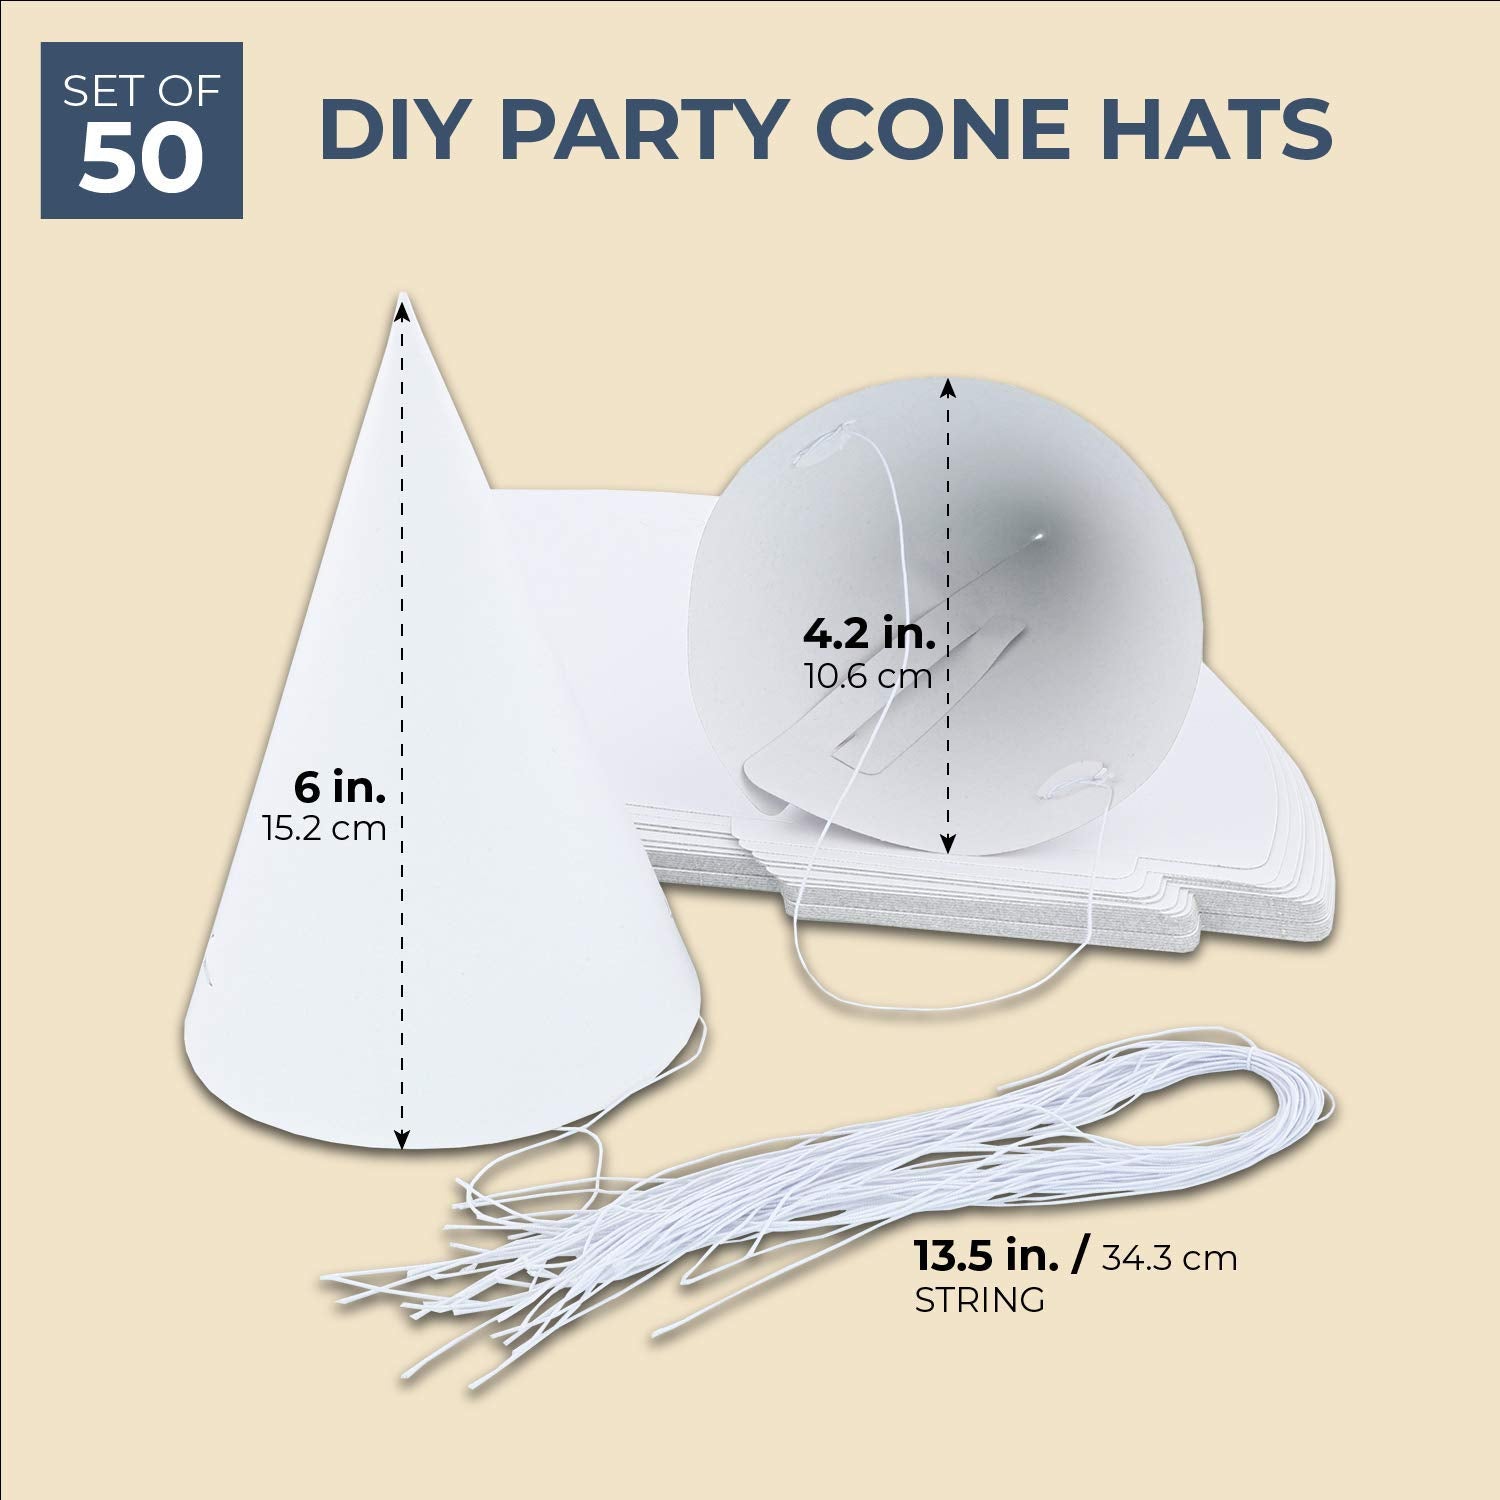 White Craft Foam Cones for Crafts, 2 Sizes (18 Pack)